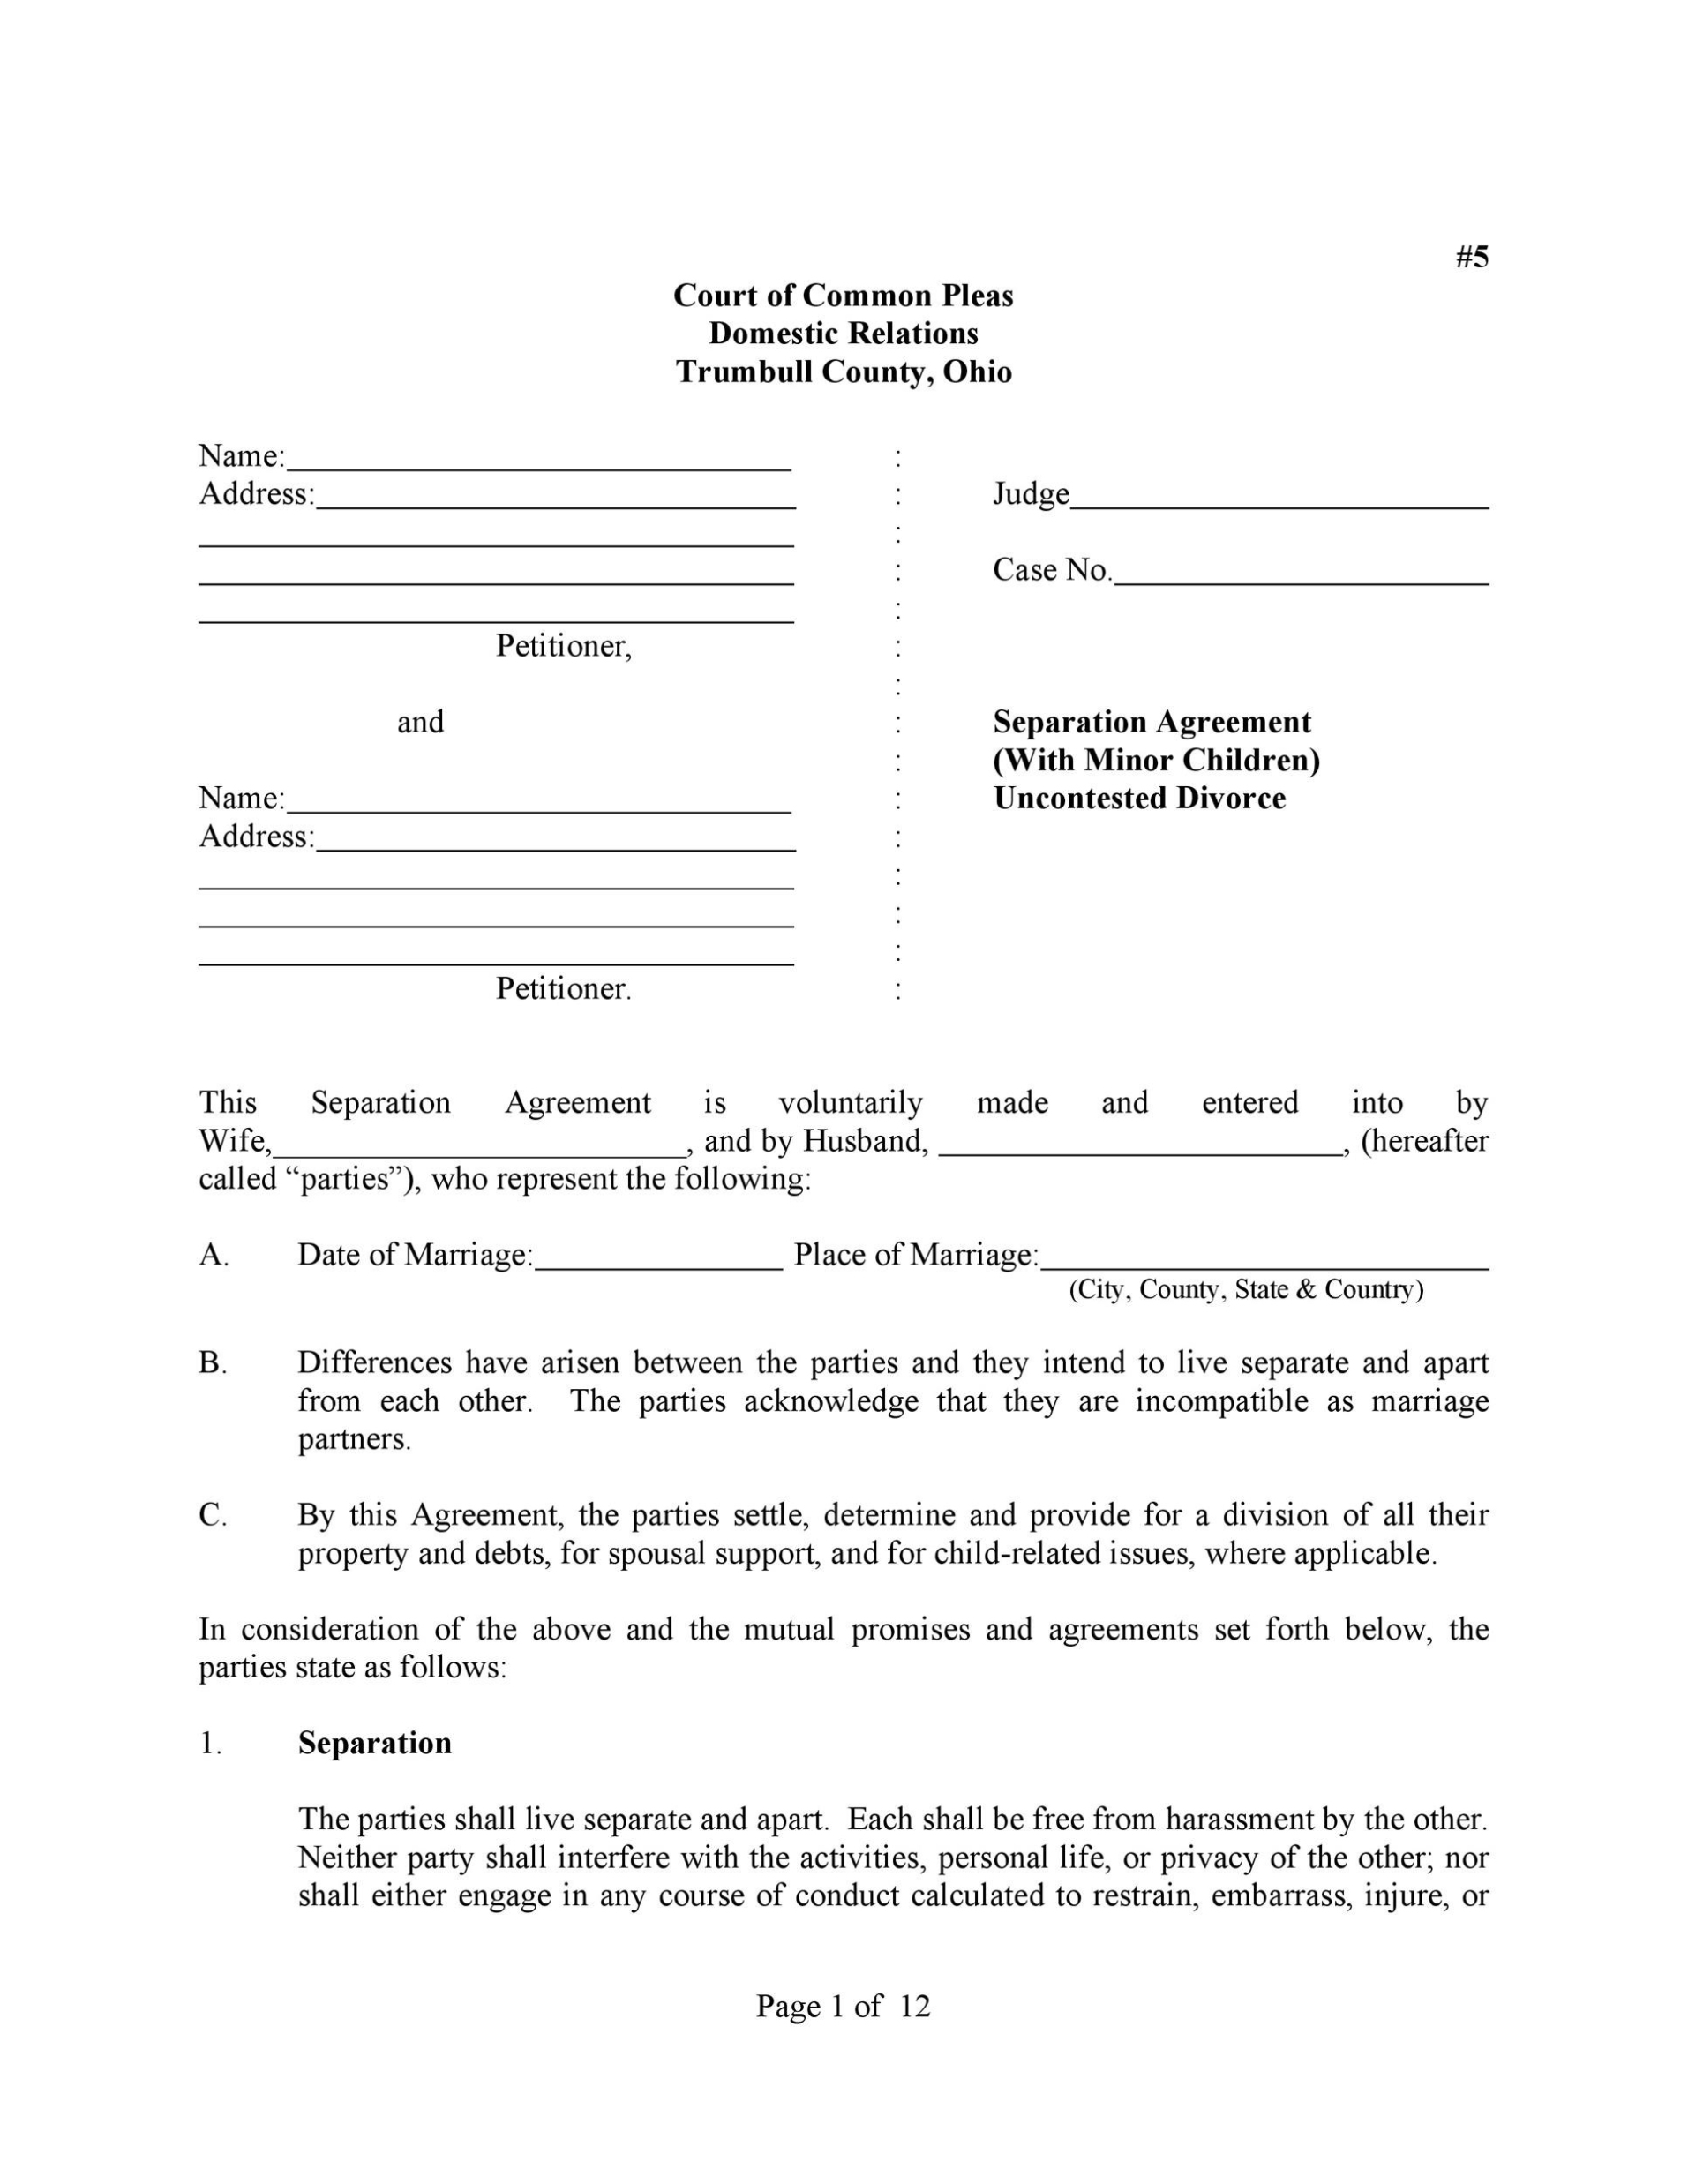 43 Official Separation Agreement Templates / Letters / Forms ᐅ Templatelab Pertaining To Divorce Financial Settlement Agreement Template